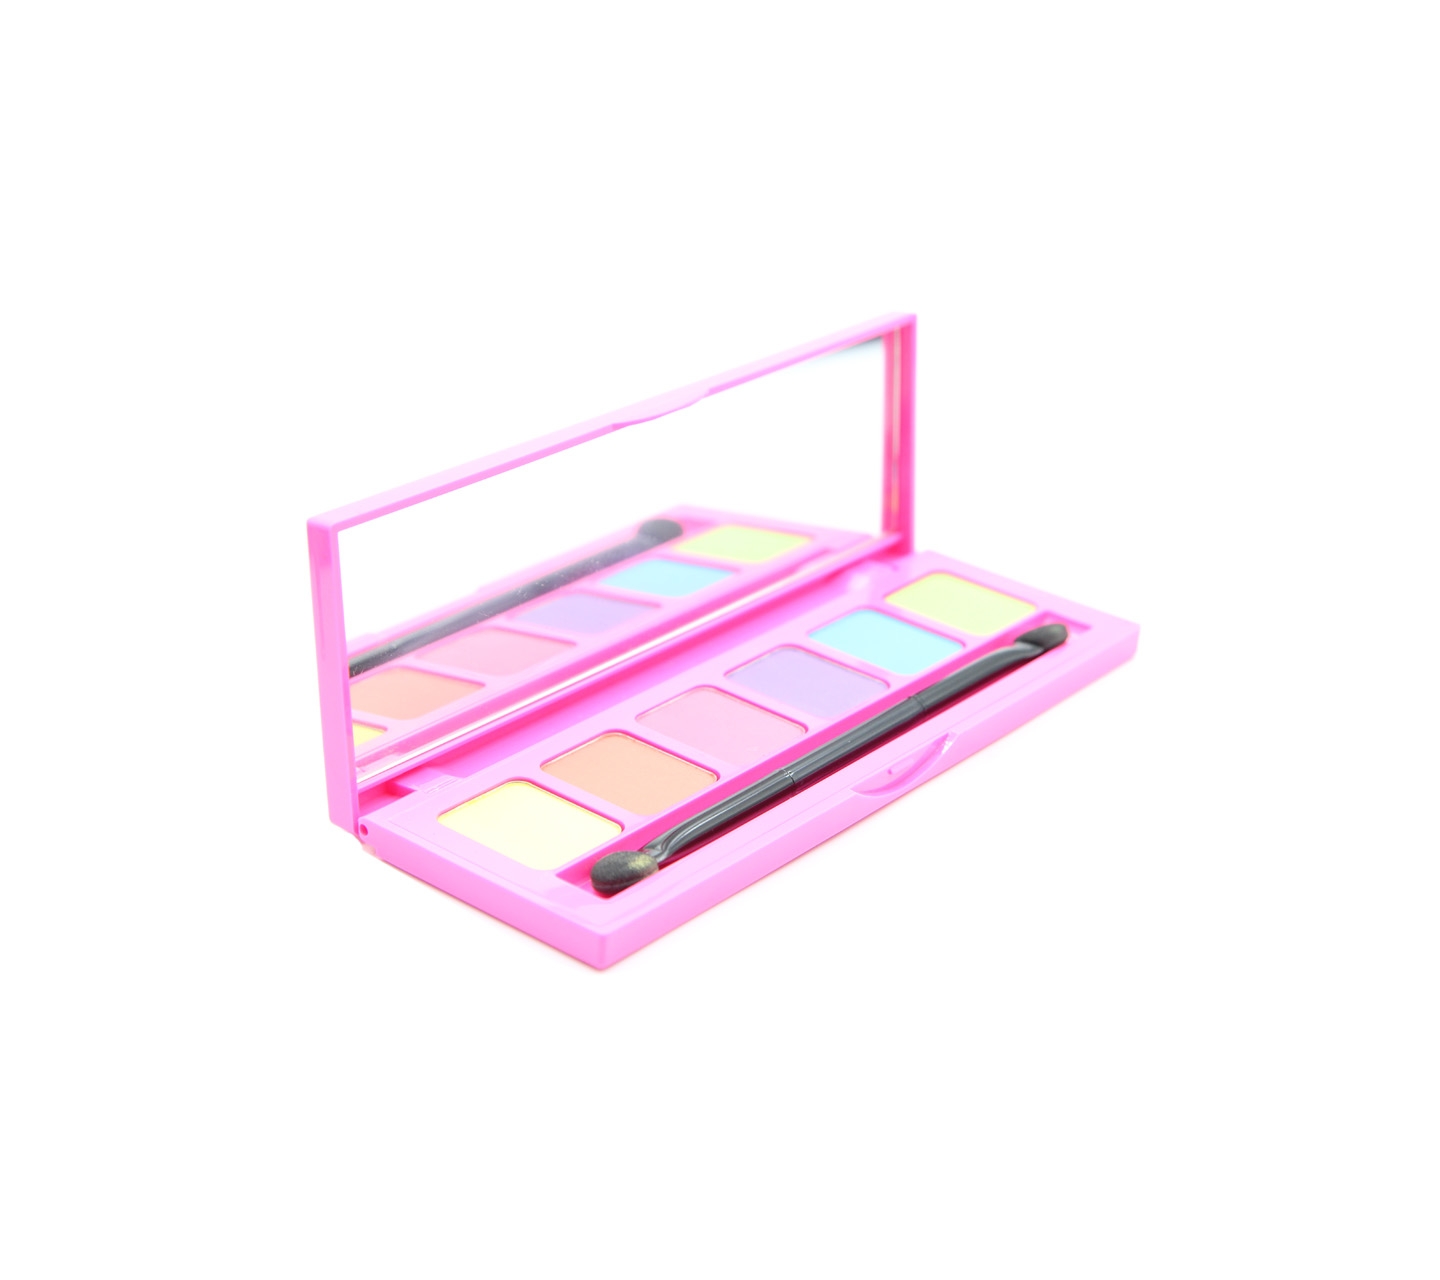 Kiko Active Fluo Eyeshadow Sets and Palette